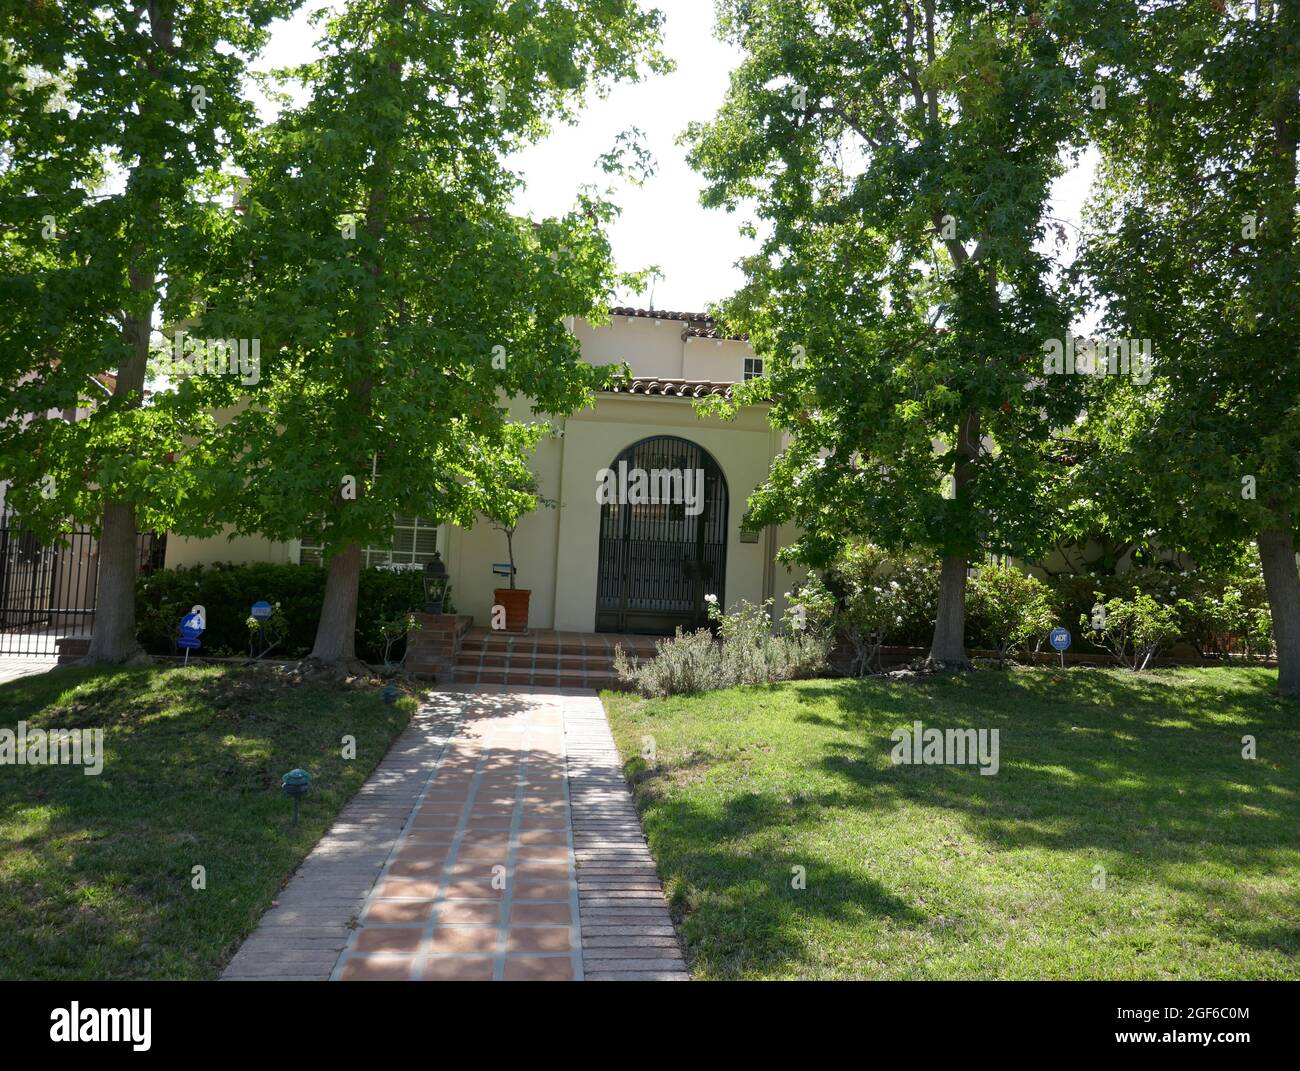 Beverly Hills, California, USA 20th August 2021 A general view of atmosphere of Actor Fred Clark, Actor Benay Venita and Bud Austin's Former Home/house at 625 N. Hillcrest Road on August 20, 2021 in Beverly Hills, California, USA. Photo by Barry King/Alamy Stock Photo Stock Photo